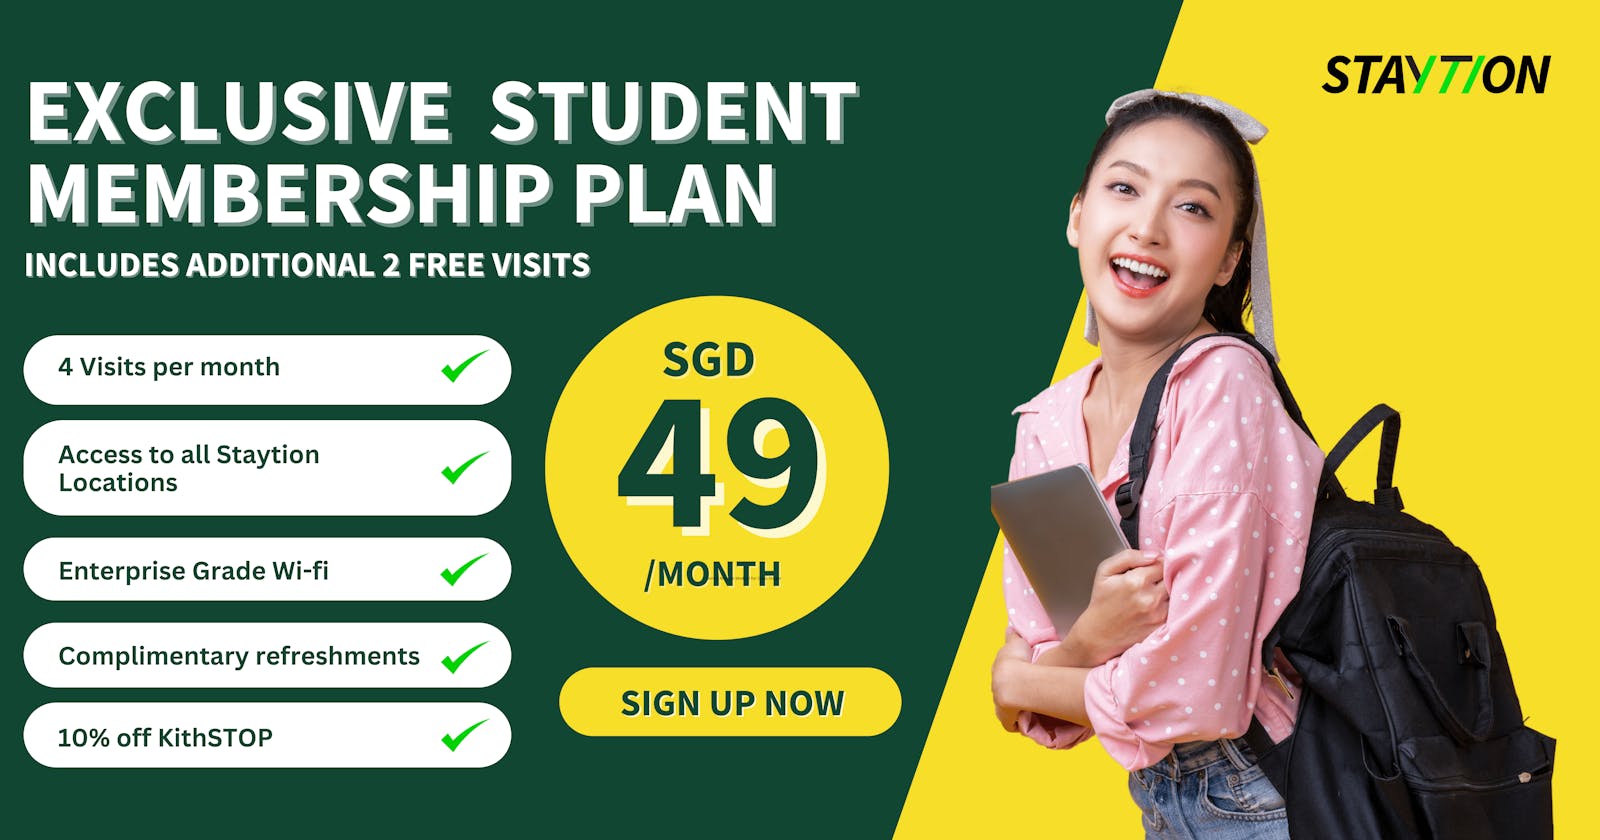 Exclusive Student Membership Promotions - Just $49 per month with additional 2 FREE visits!